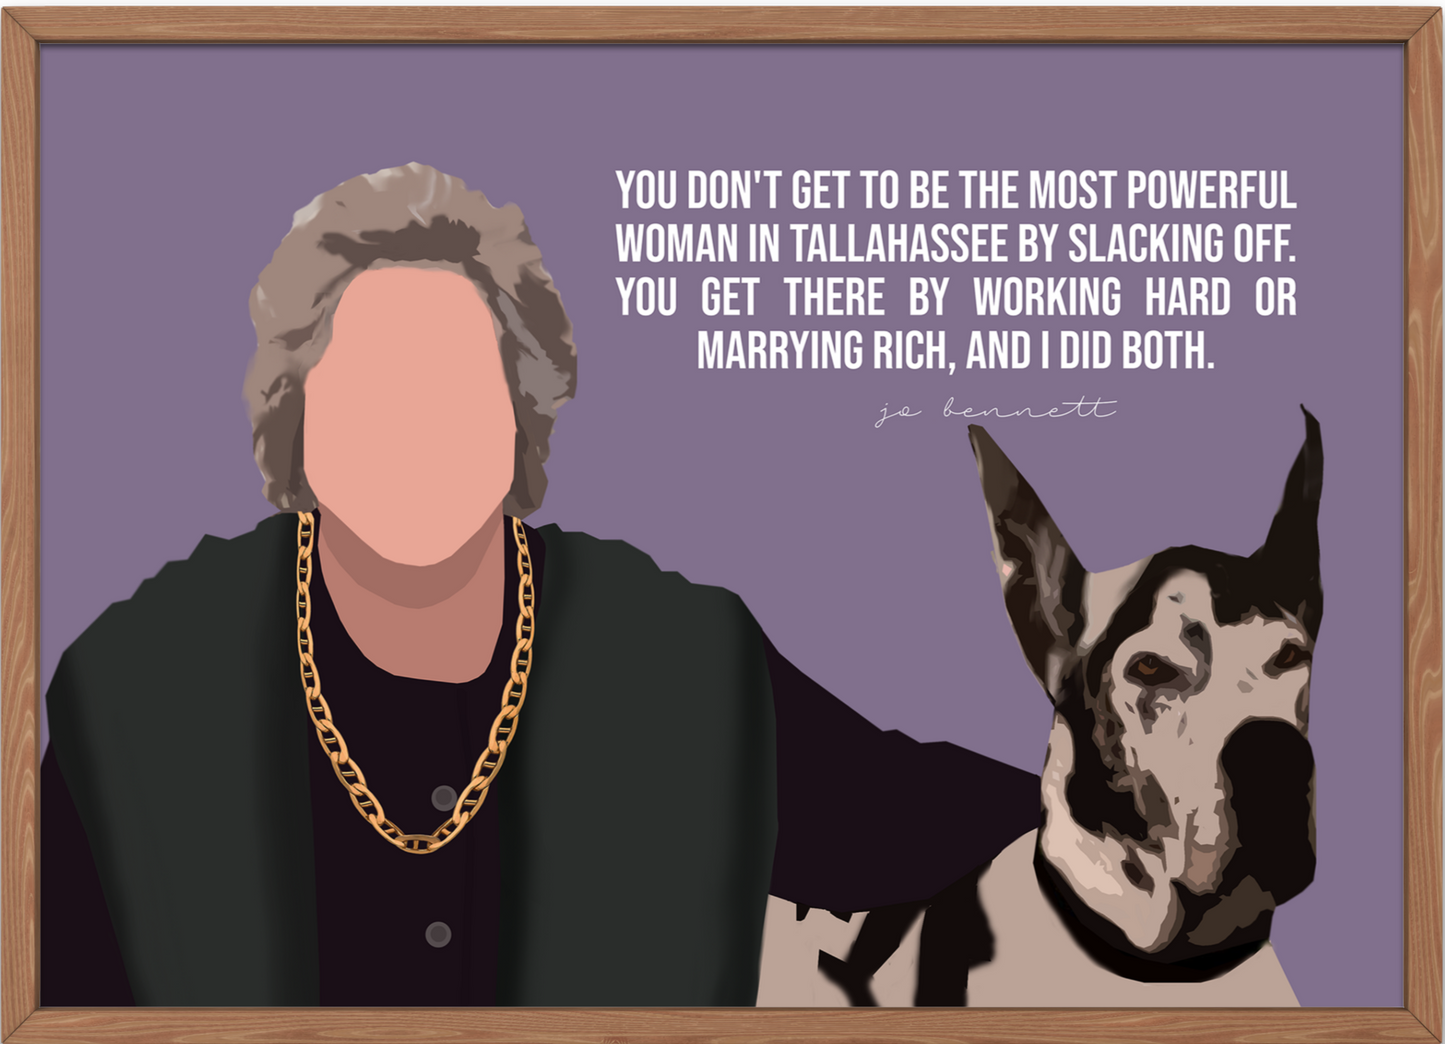 The Office Poster | Jo Bennett - Tallahassee Quote